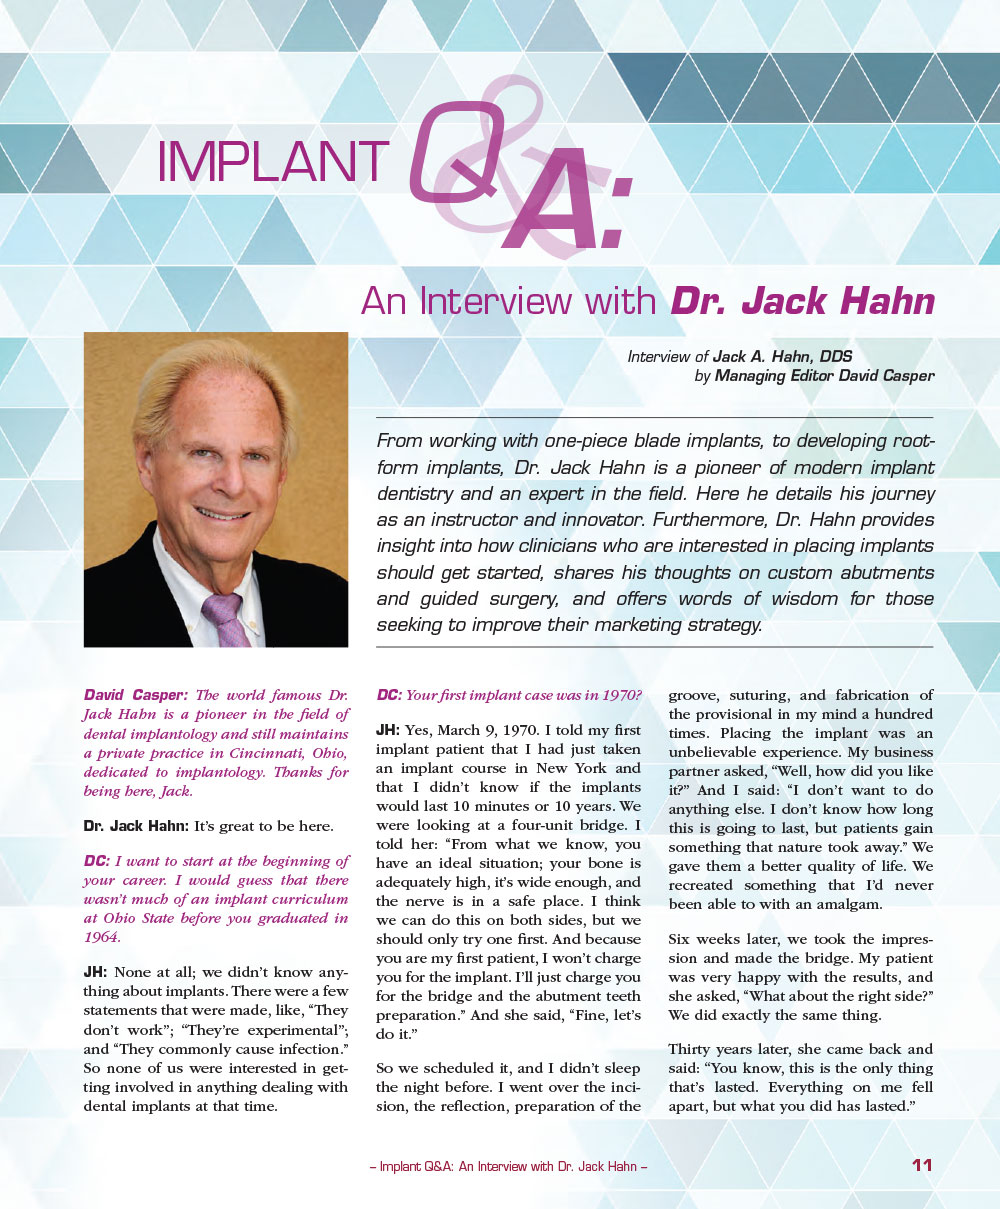 Inplant Q&A: An Interview with Dr. Jack Hahn